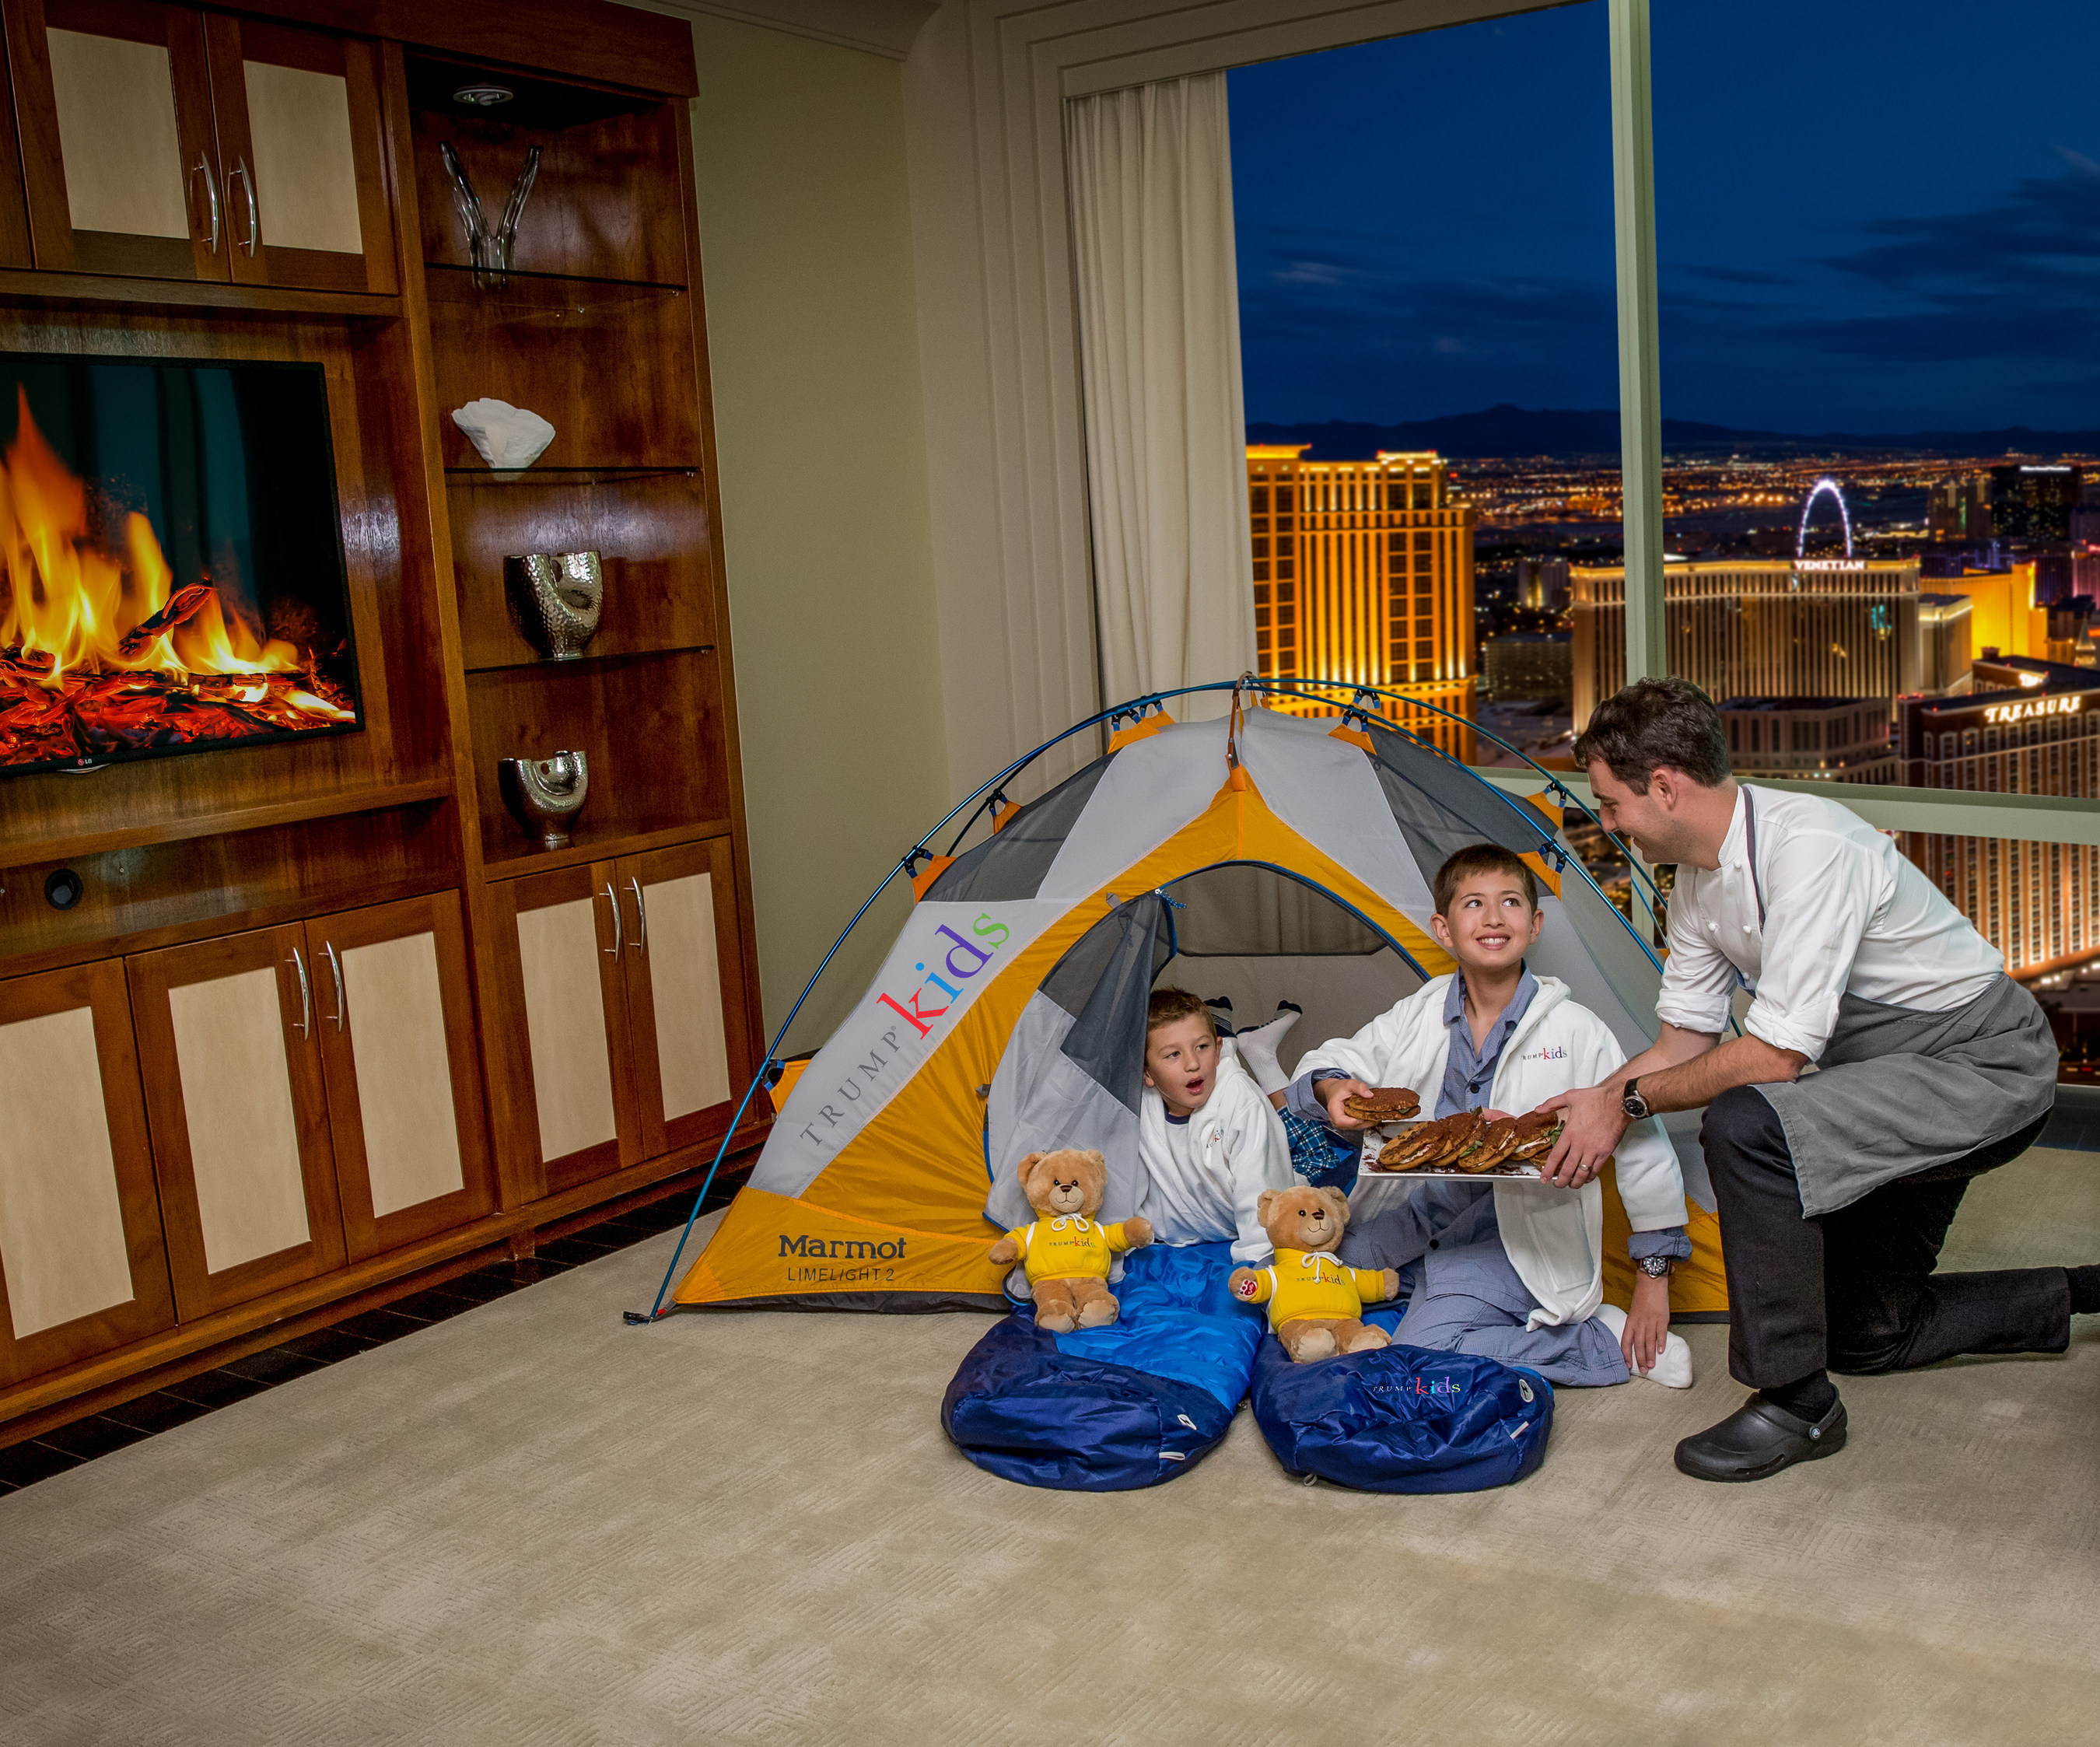 Trump International Vegas Launches Trump® Kids "Glamping" Package For Travelers